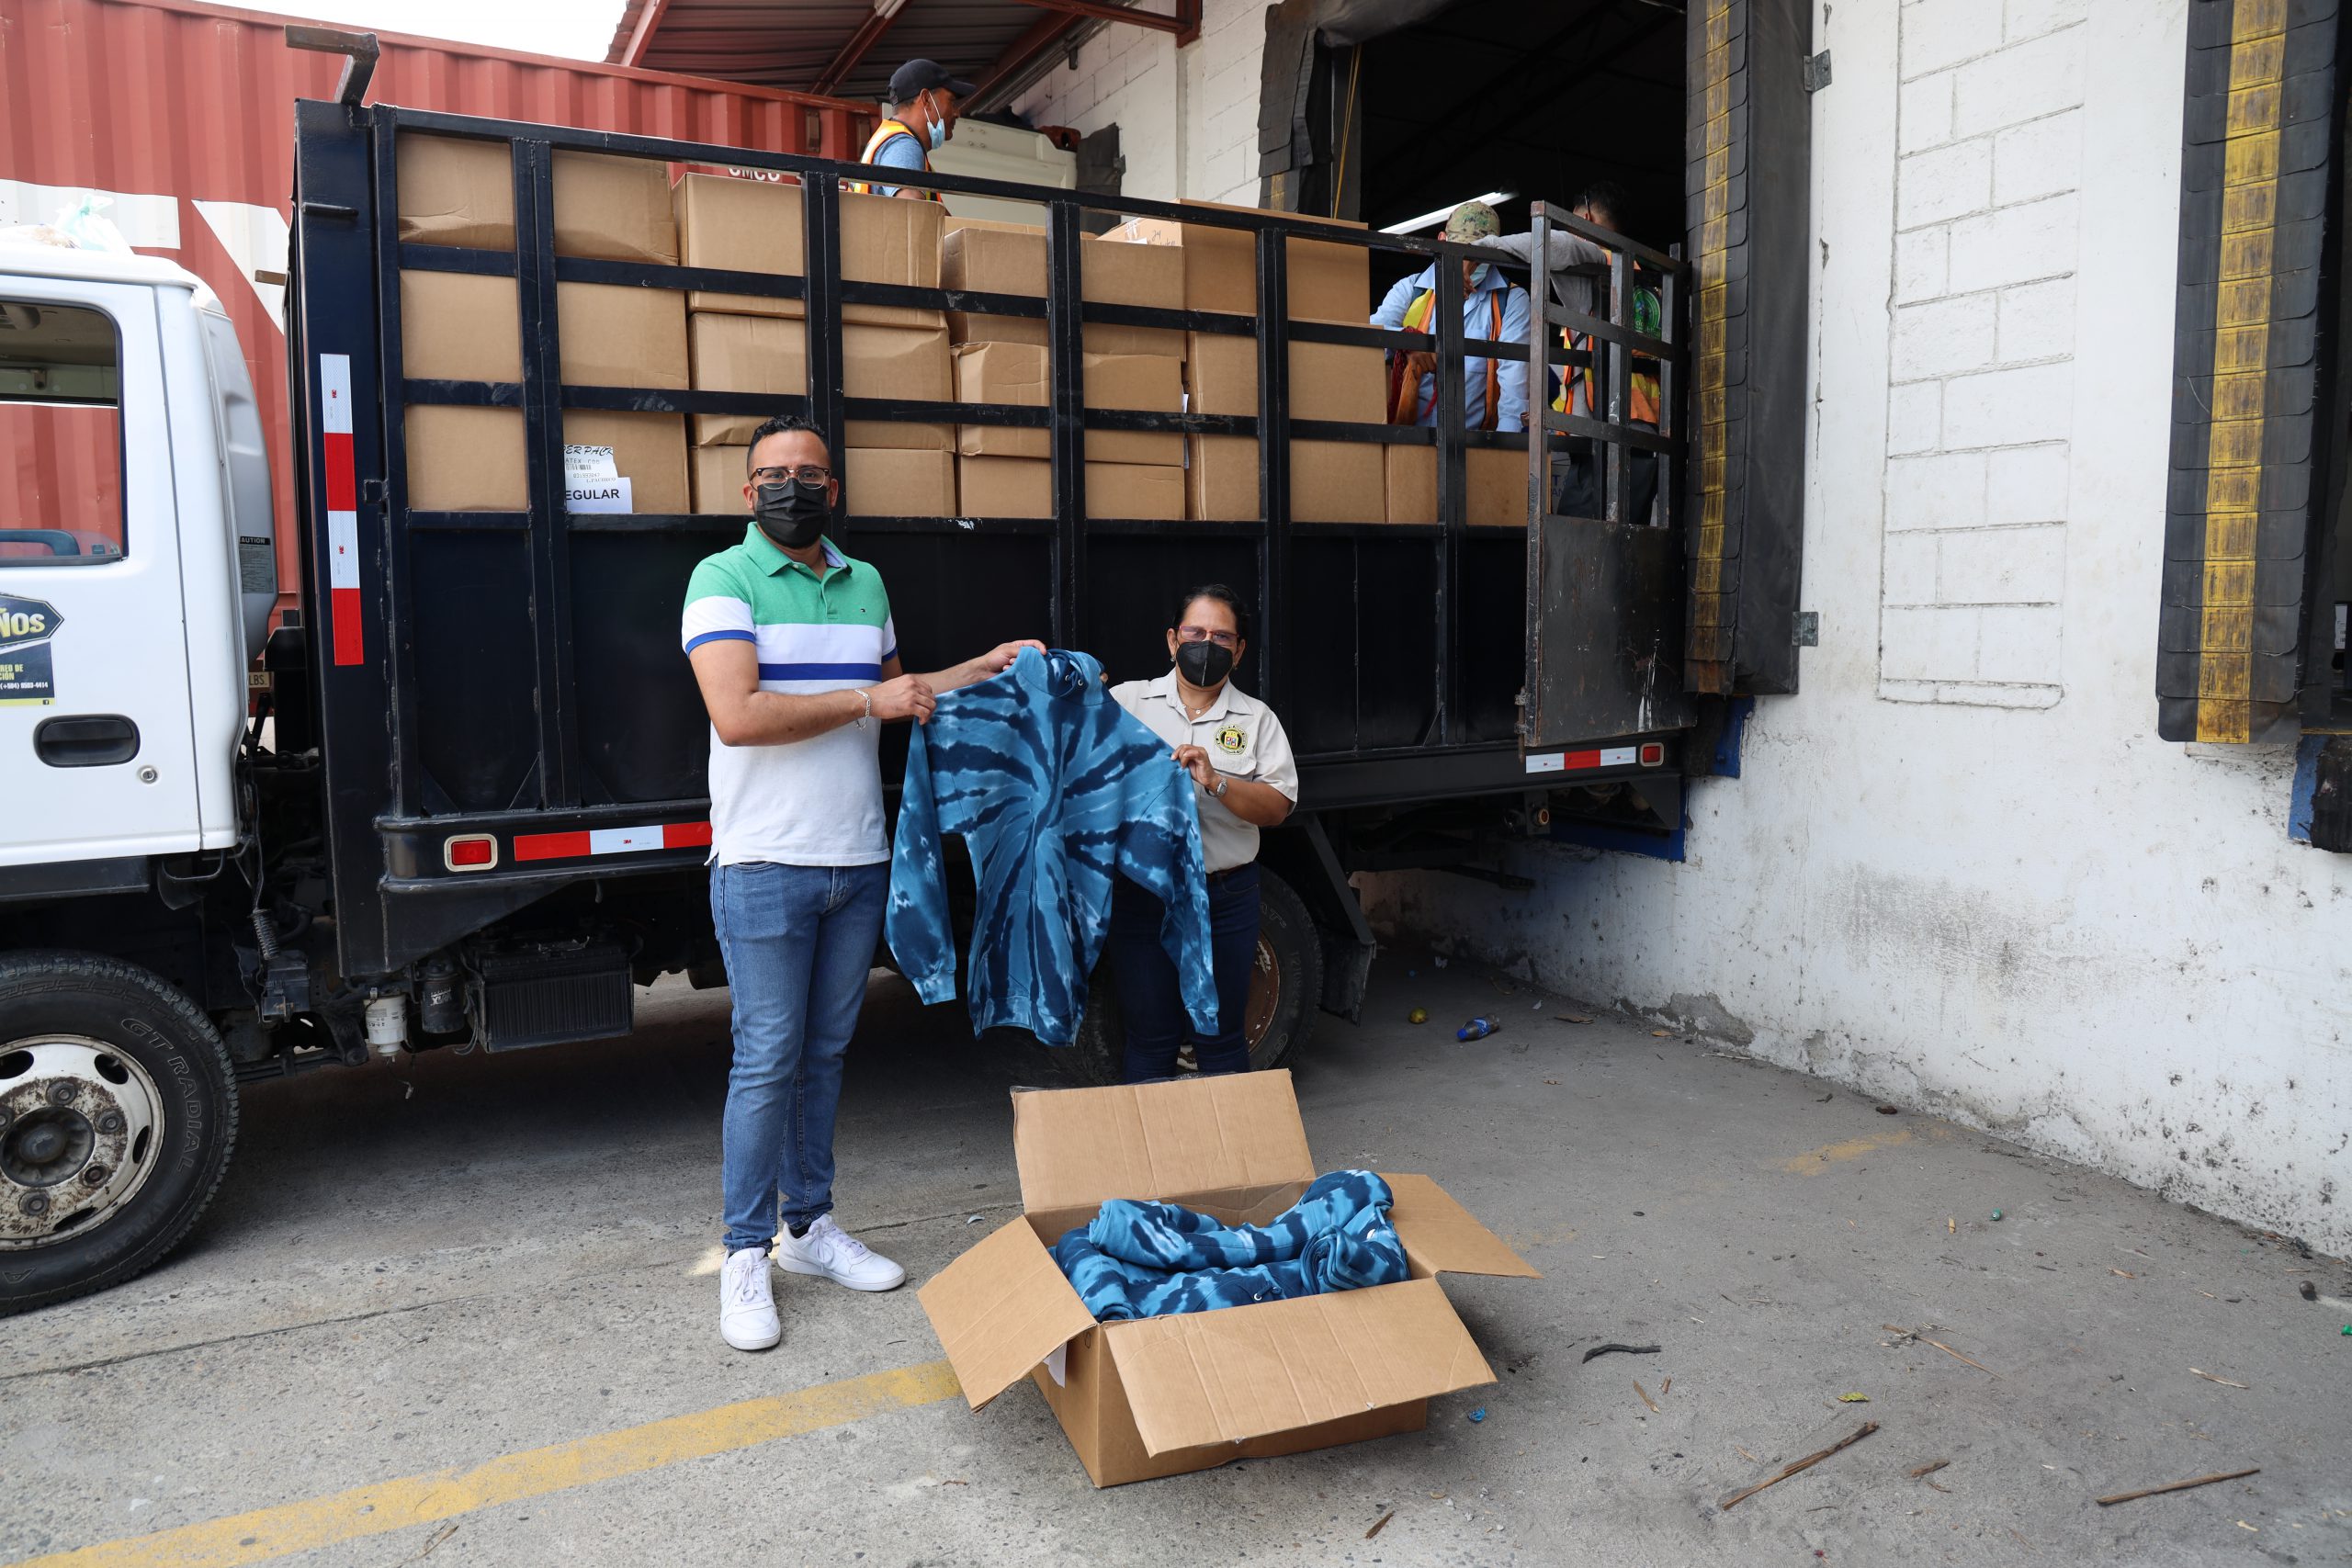 MORE THAN 15,000 GARMENTS FOR THOSE AFFECTED IN GUANAJA